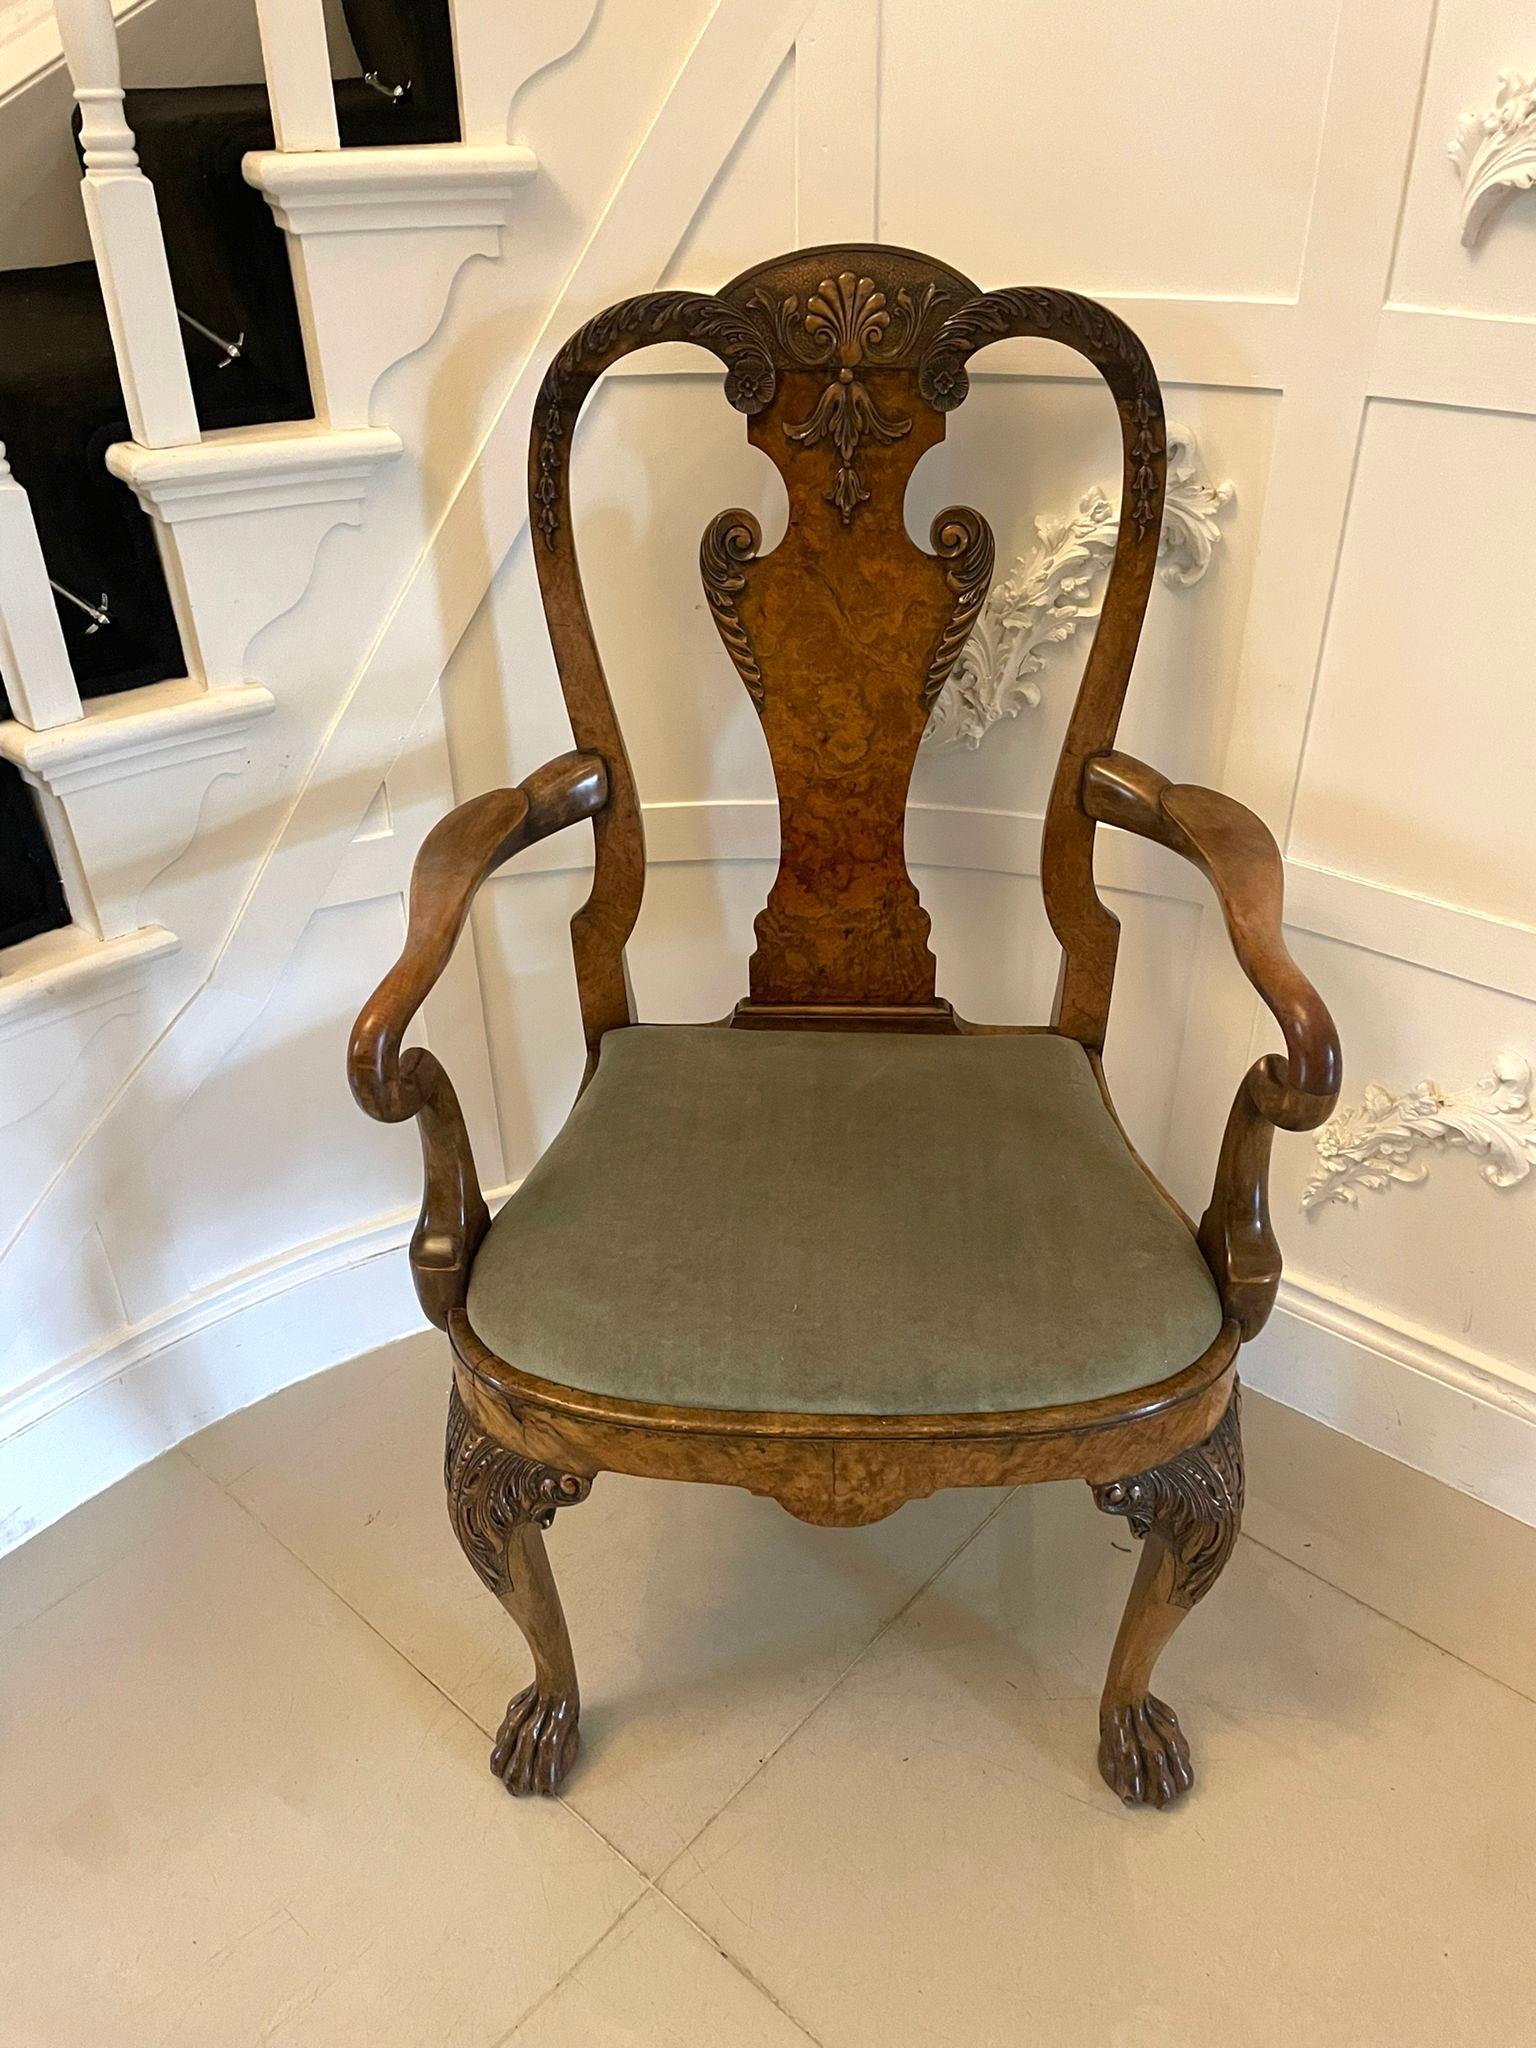 Superb quality antique Victorian burr and carved walnut desk chair having a superb quality carved walnut back with a shaped burr walnut splat, shaped open arms, newly reupholstered seat in a quality fabric standing on shaped carved cabriole legs